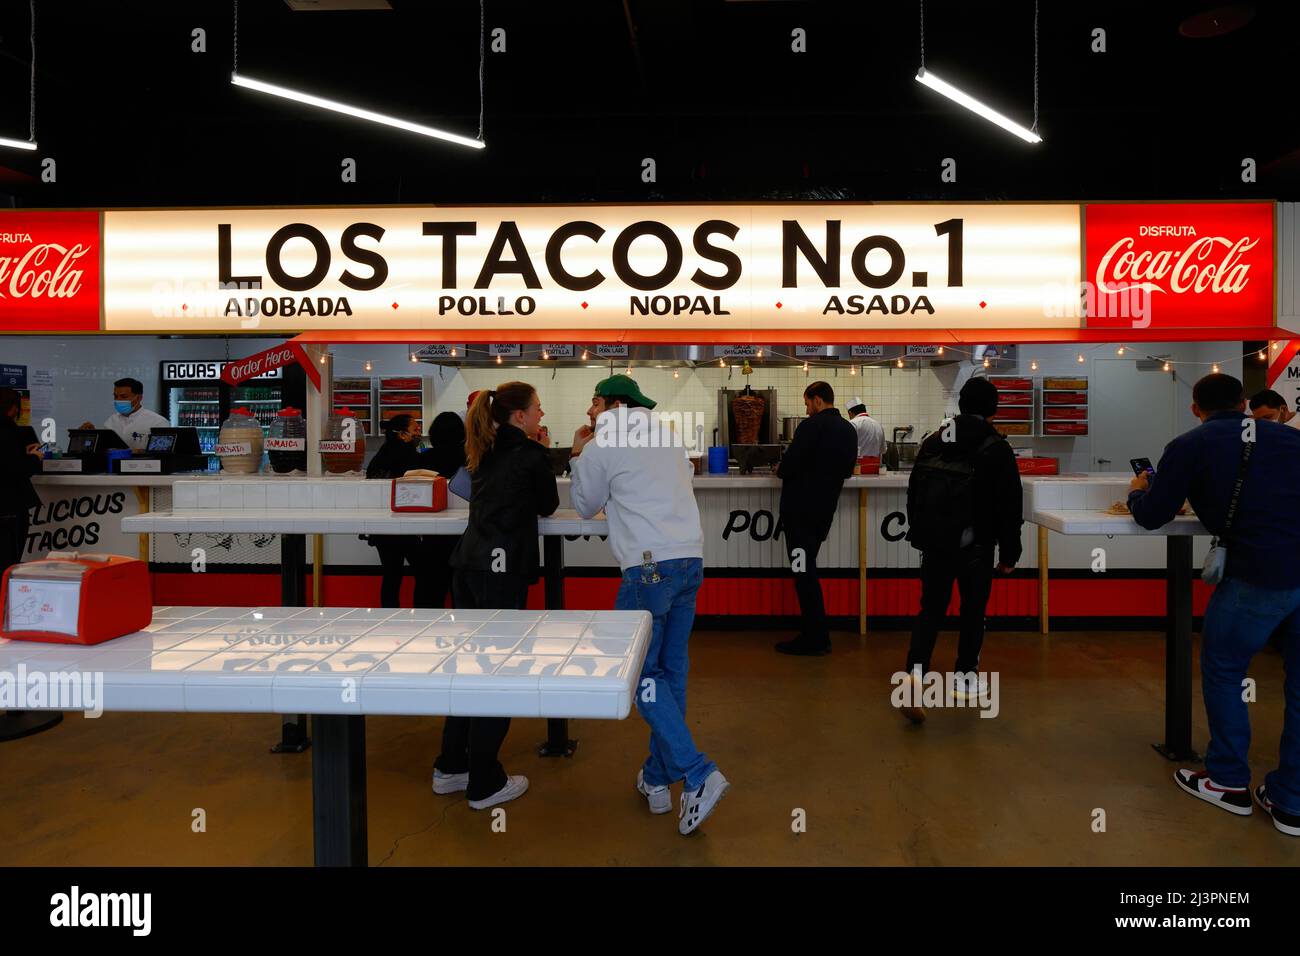 Interior of a Los Tacos No. 1 tacqueria and fast casual Mexican restaurant chain in New York, NY. Stock Photo